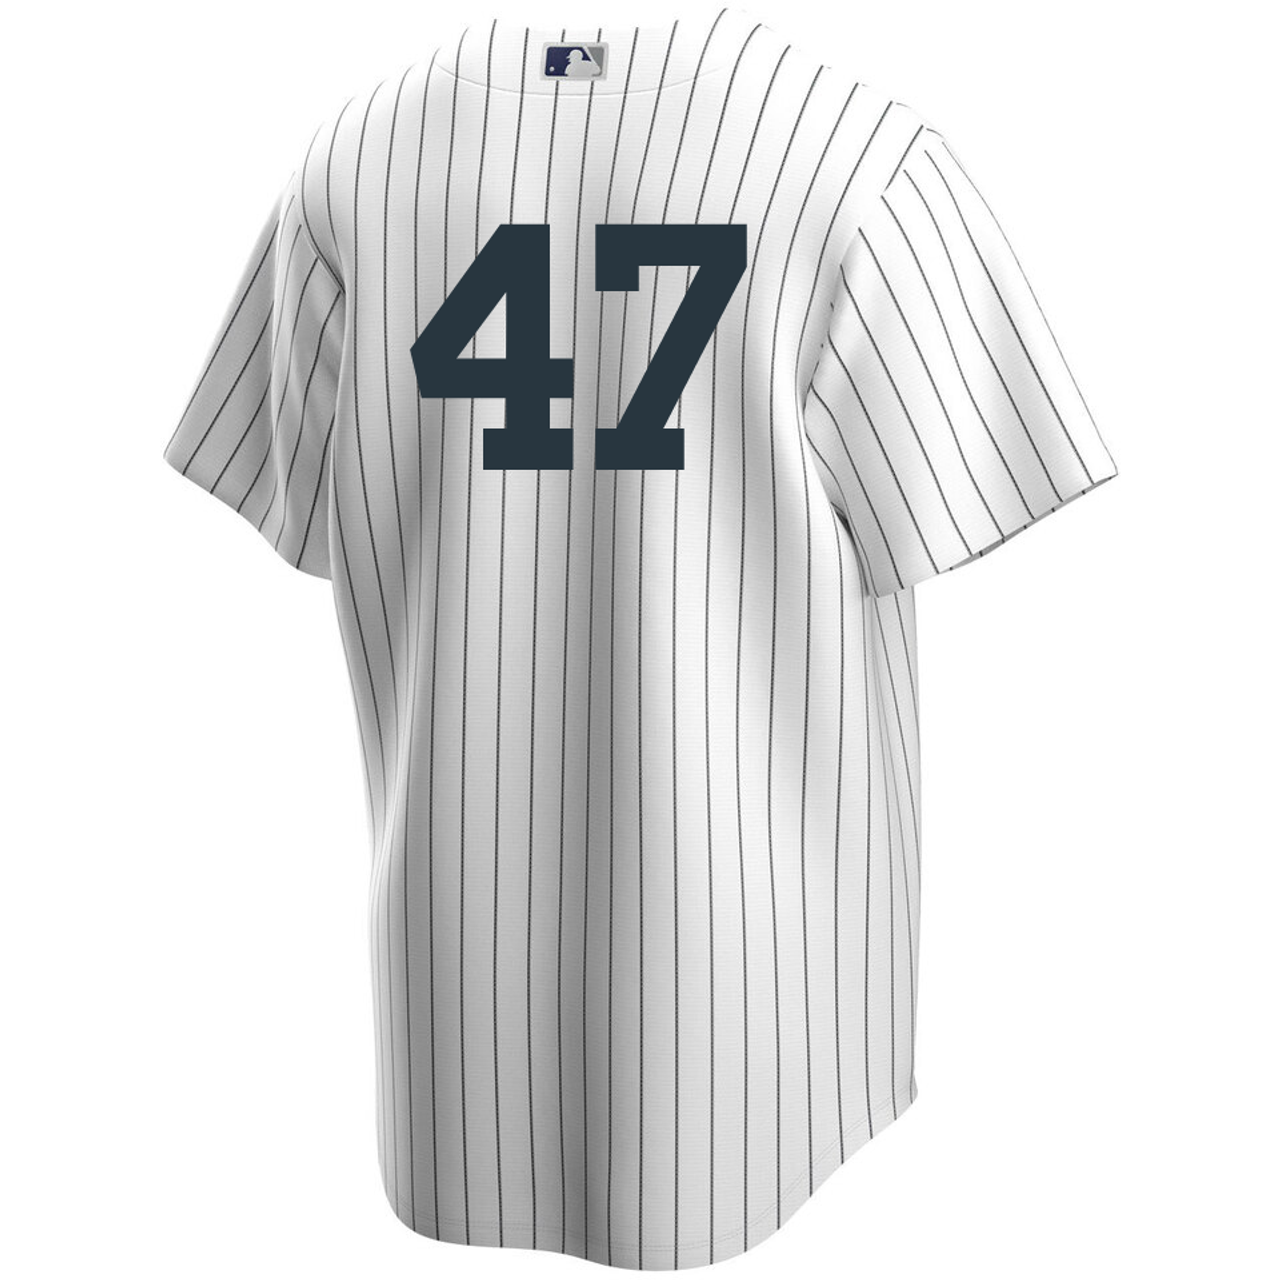 Anthony Volpe Youth Jersey - NY Yankees Replica Kids Home Jersey